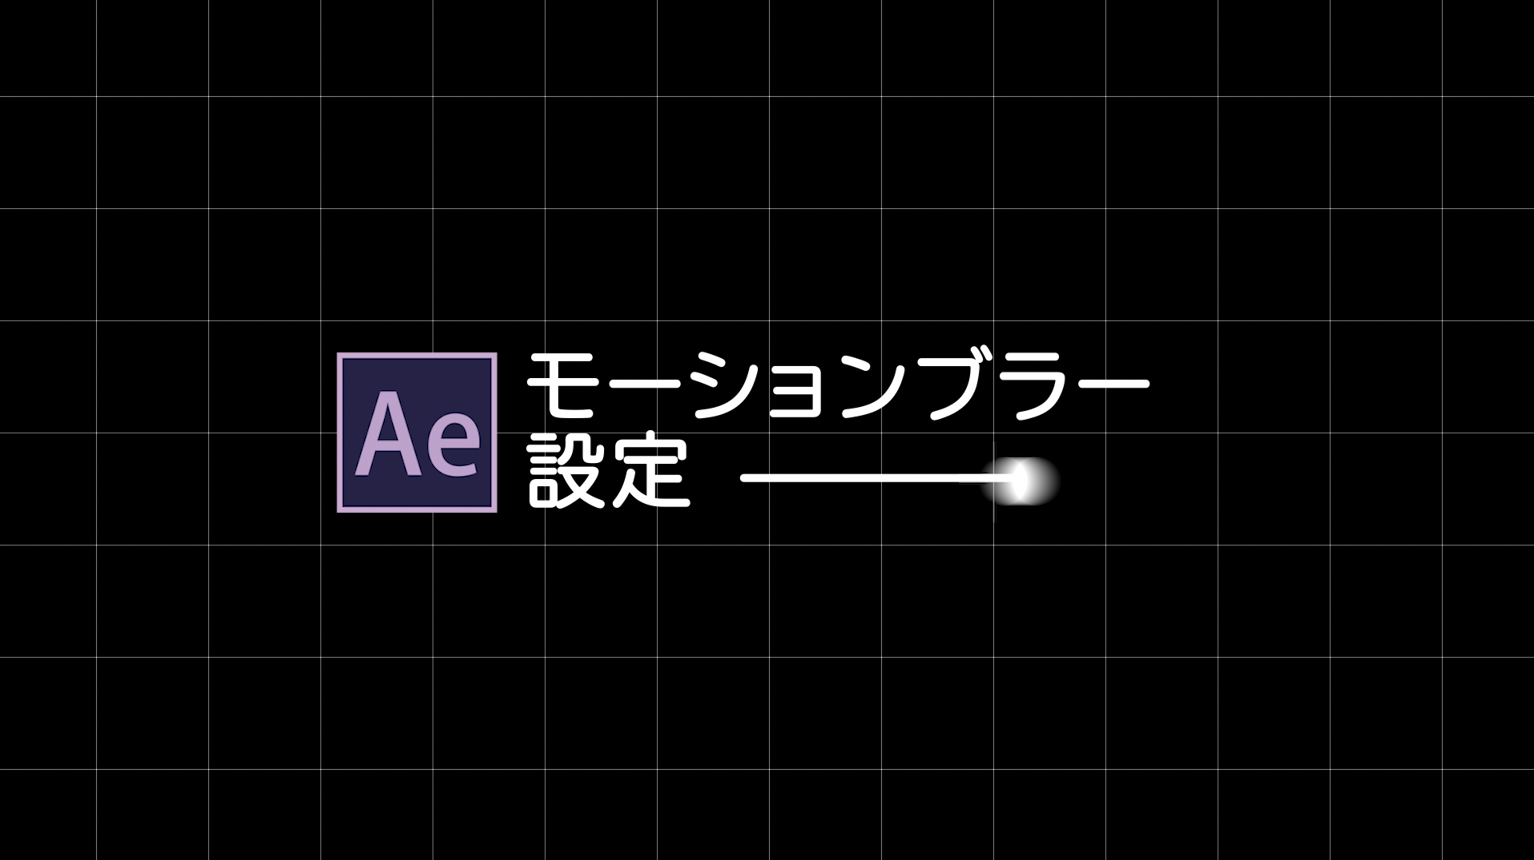 [After Effects]モーションブラー